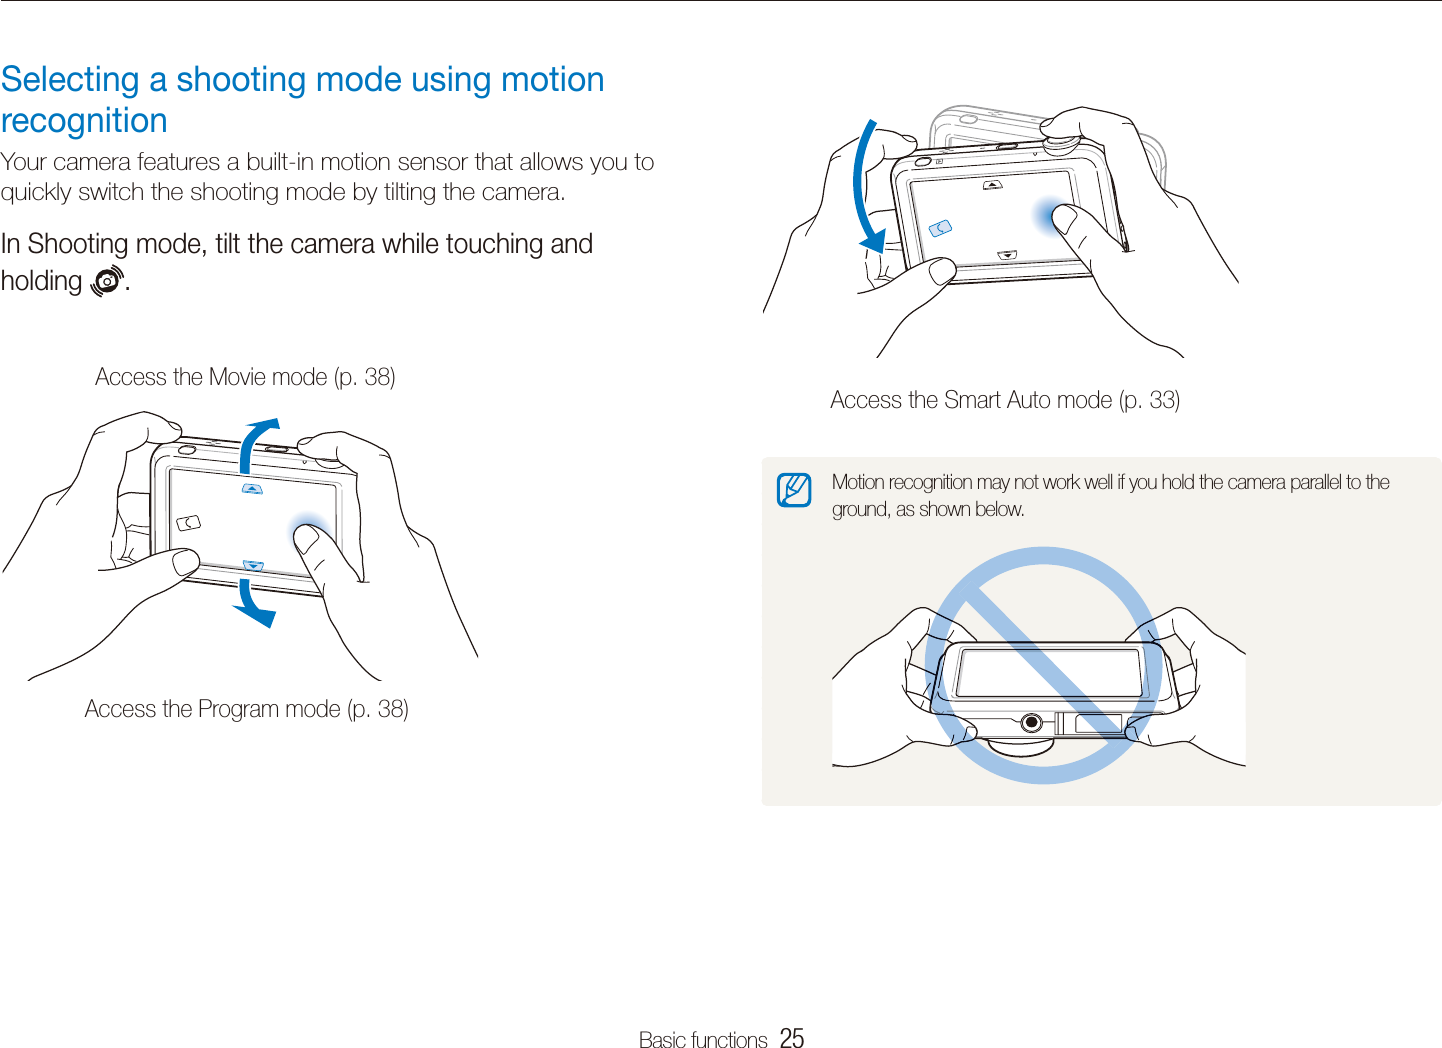 Basic functions  25Selecting a shooting modeAccess the Smart Auto mode (p. 33)Motion recognition may not work well if you hold the camera parallel to the ground, as shown below.Selecting a shooting mode using motion recognitionYour camera features a built-in motion sensor that allows you to quickly switch the shooting mode by tilting the camera. In Shooting mode, tilt the camera while touching and holding  .Access the Movie mode (p. 38)Access the Program mode (p. 38)